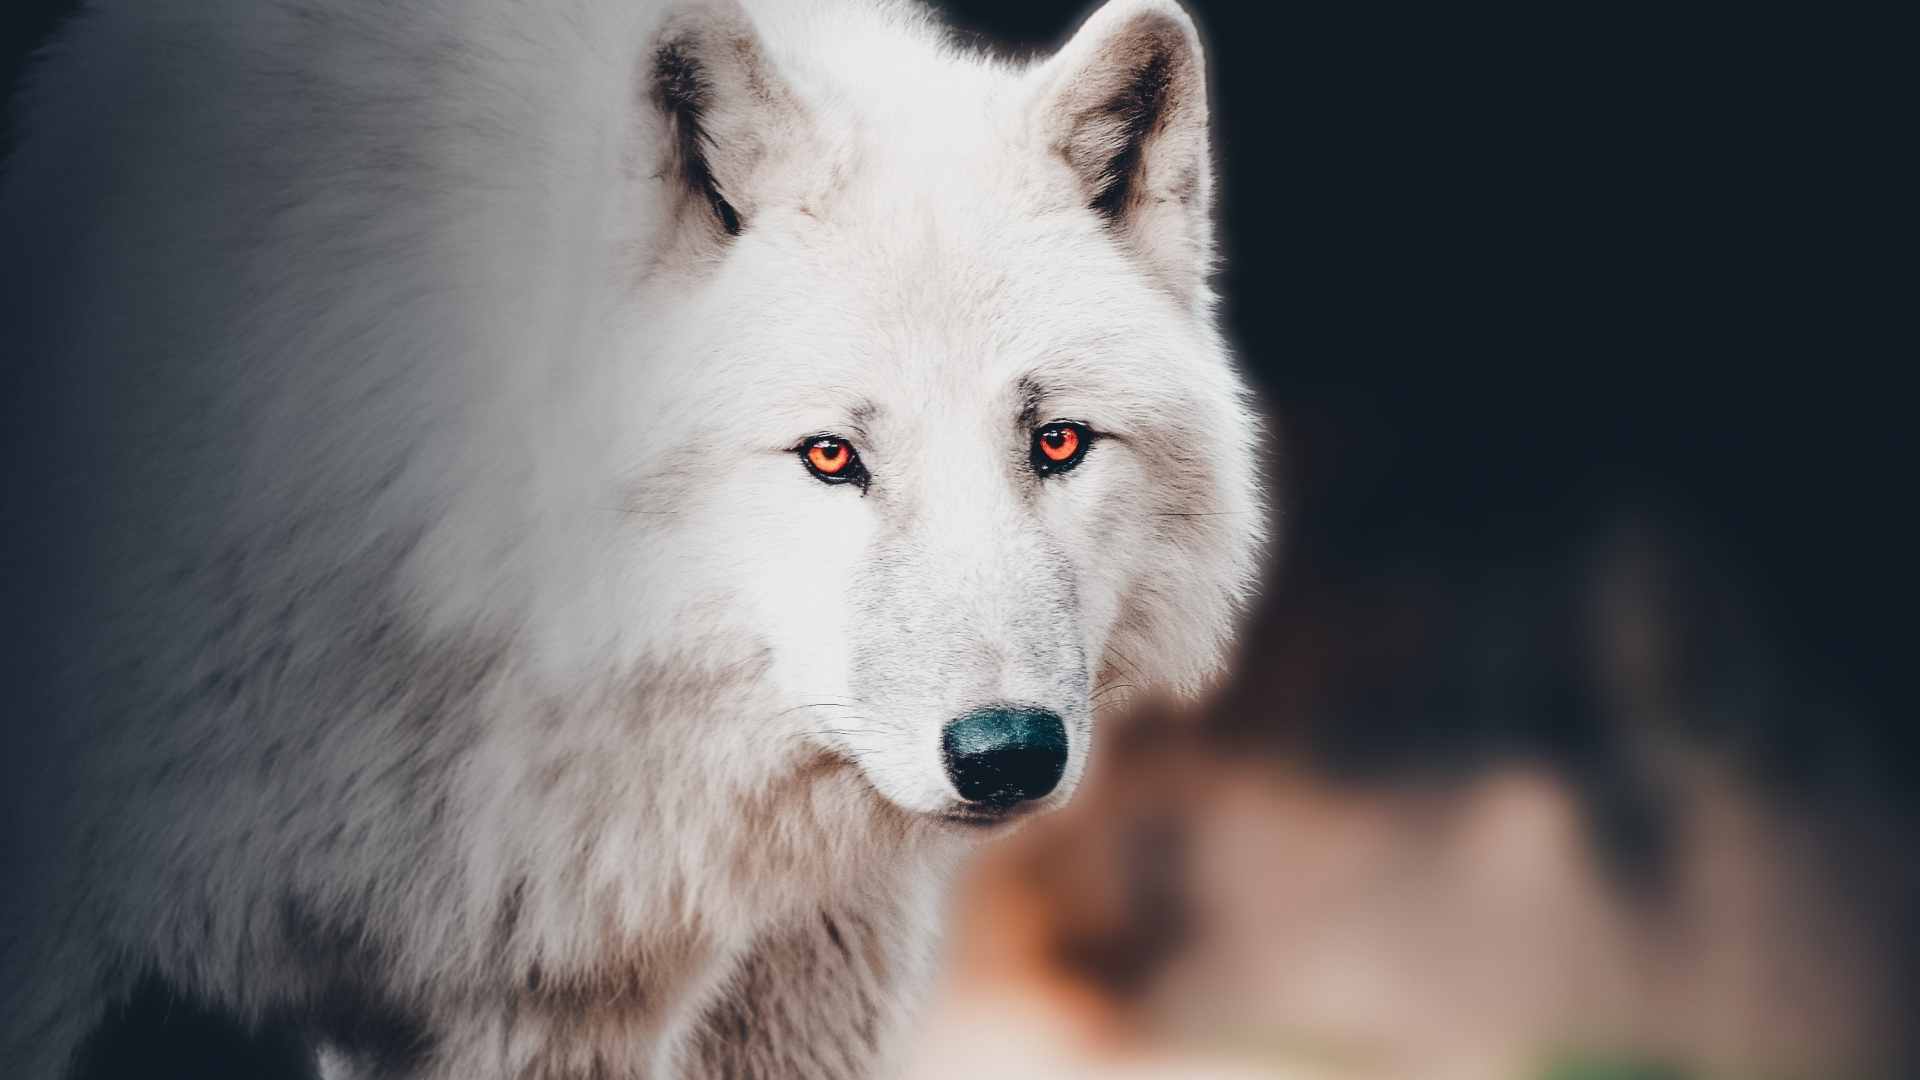 1920x1080 Download the white wolf, portrait wallpaper, full hd, hdtv, fhd, 1080p wallpaper, hd image, background, 21230